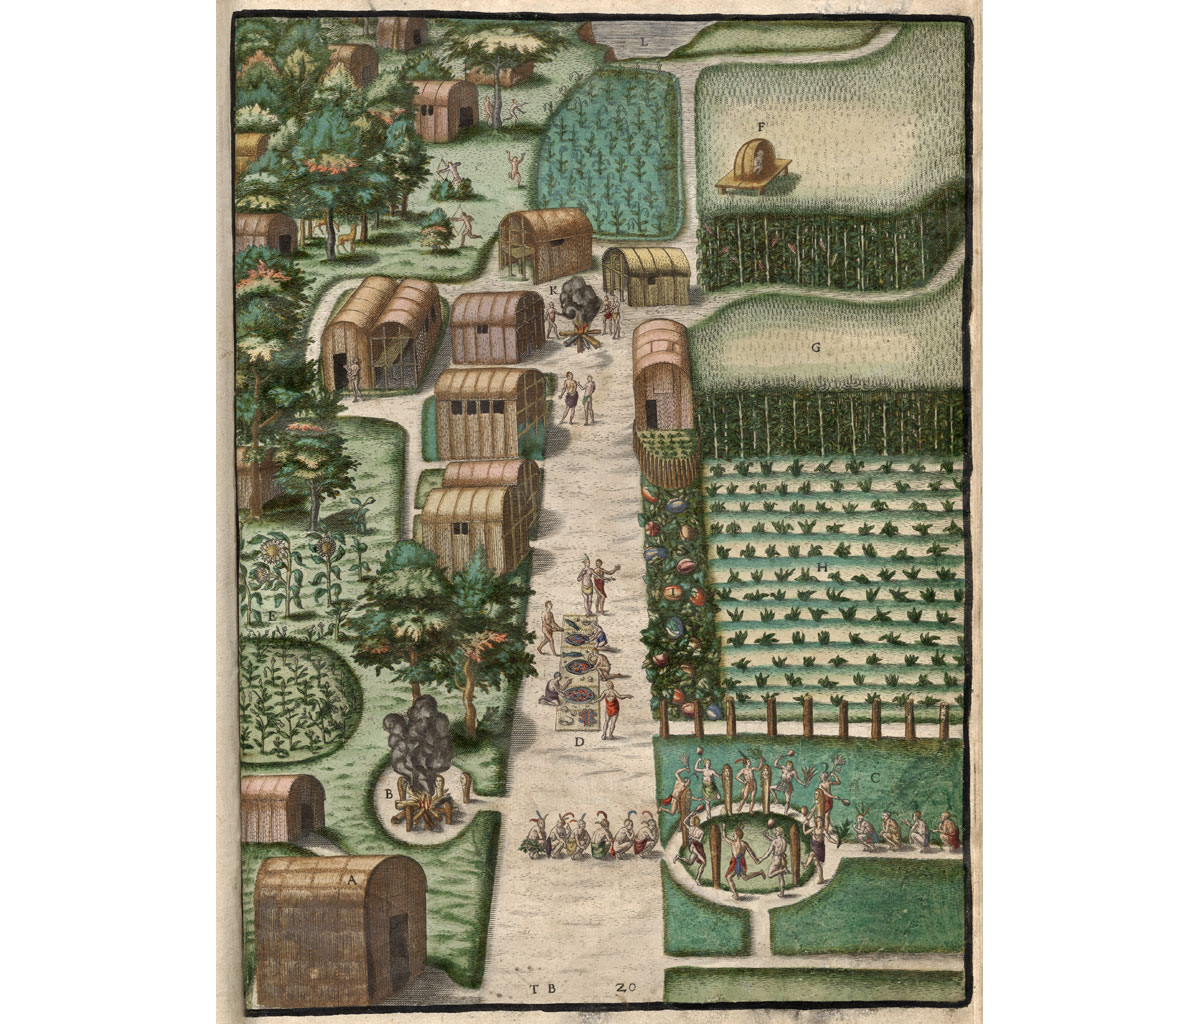 An illustration of the village of Secotan in coastal North Carolina from the late 1500s. The image shows rectangular buildings with rounded roofs arranged along a street. Trees and other plants are shows on the left side of the illustration. On the right are fields of maize in various stages of maturity. In the lower right, people appear to be playing a ball game. Other people can be seen in the main street and in other parts of the image.